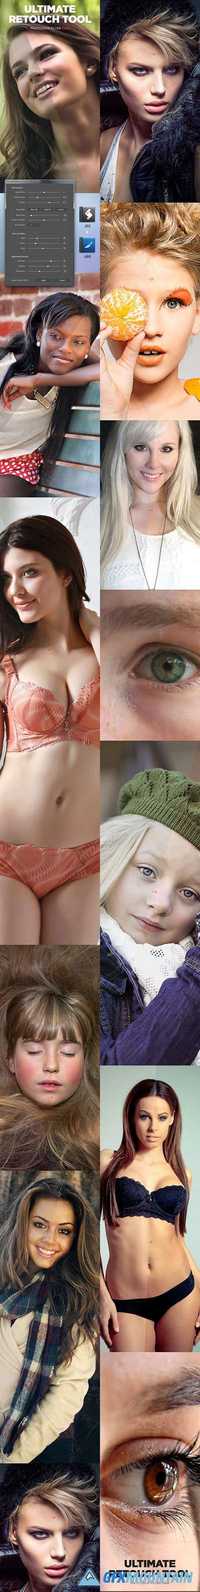 GraphicRiver - Ultimate Retouch Tool Photoshop Filter 15902444